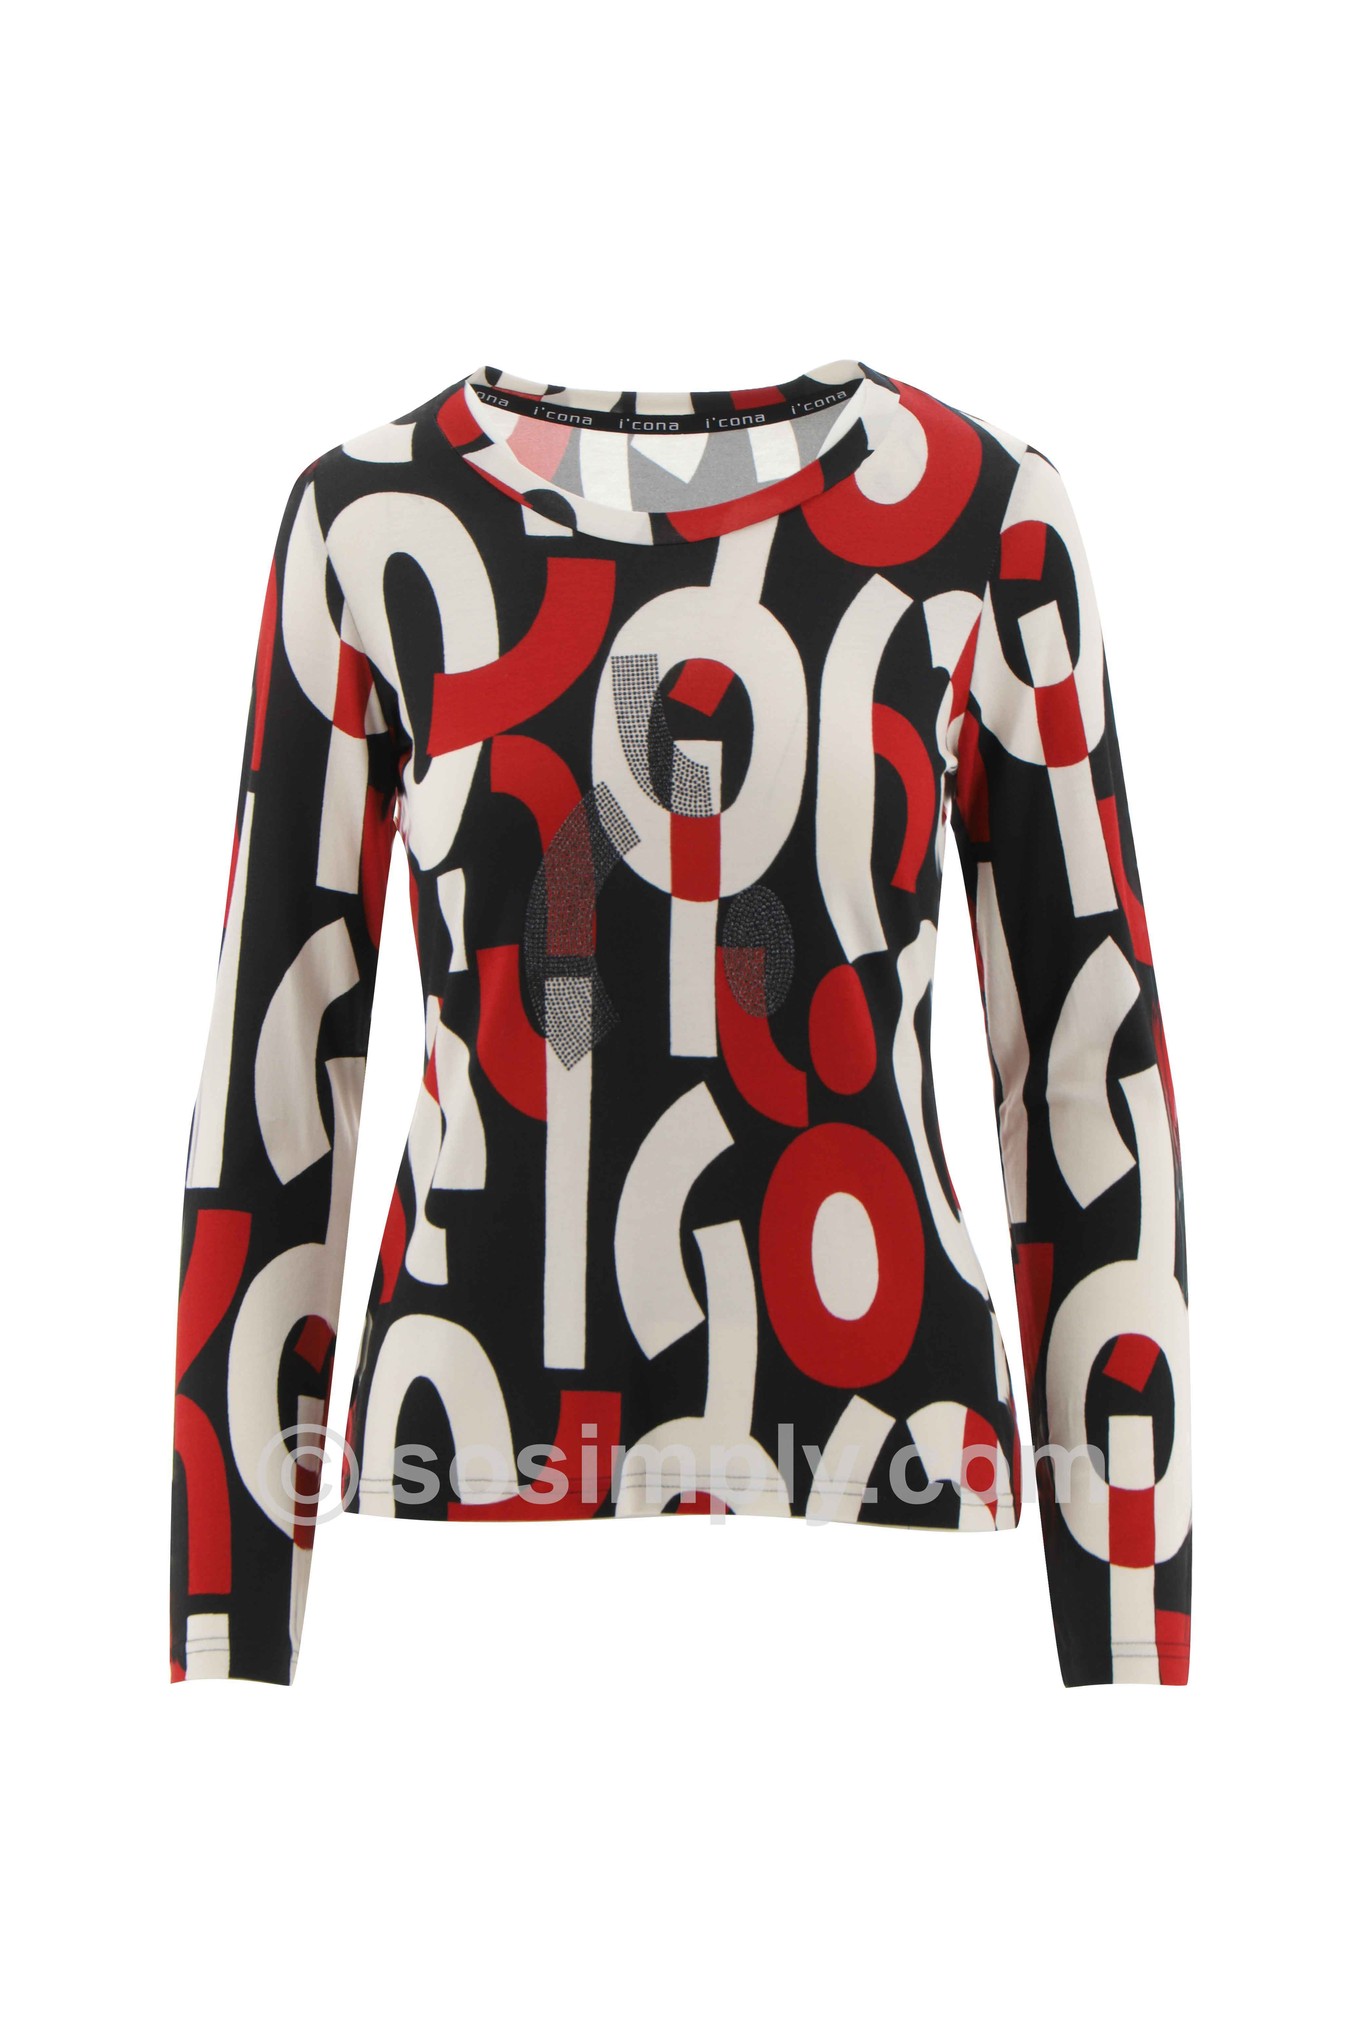 I'cona Iconic Abstract Long Sleeve Top